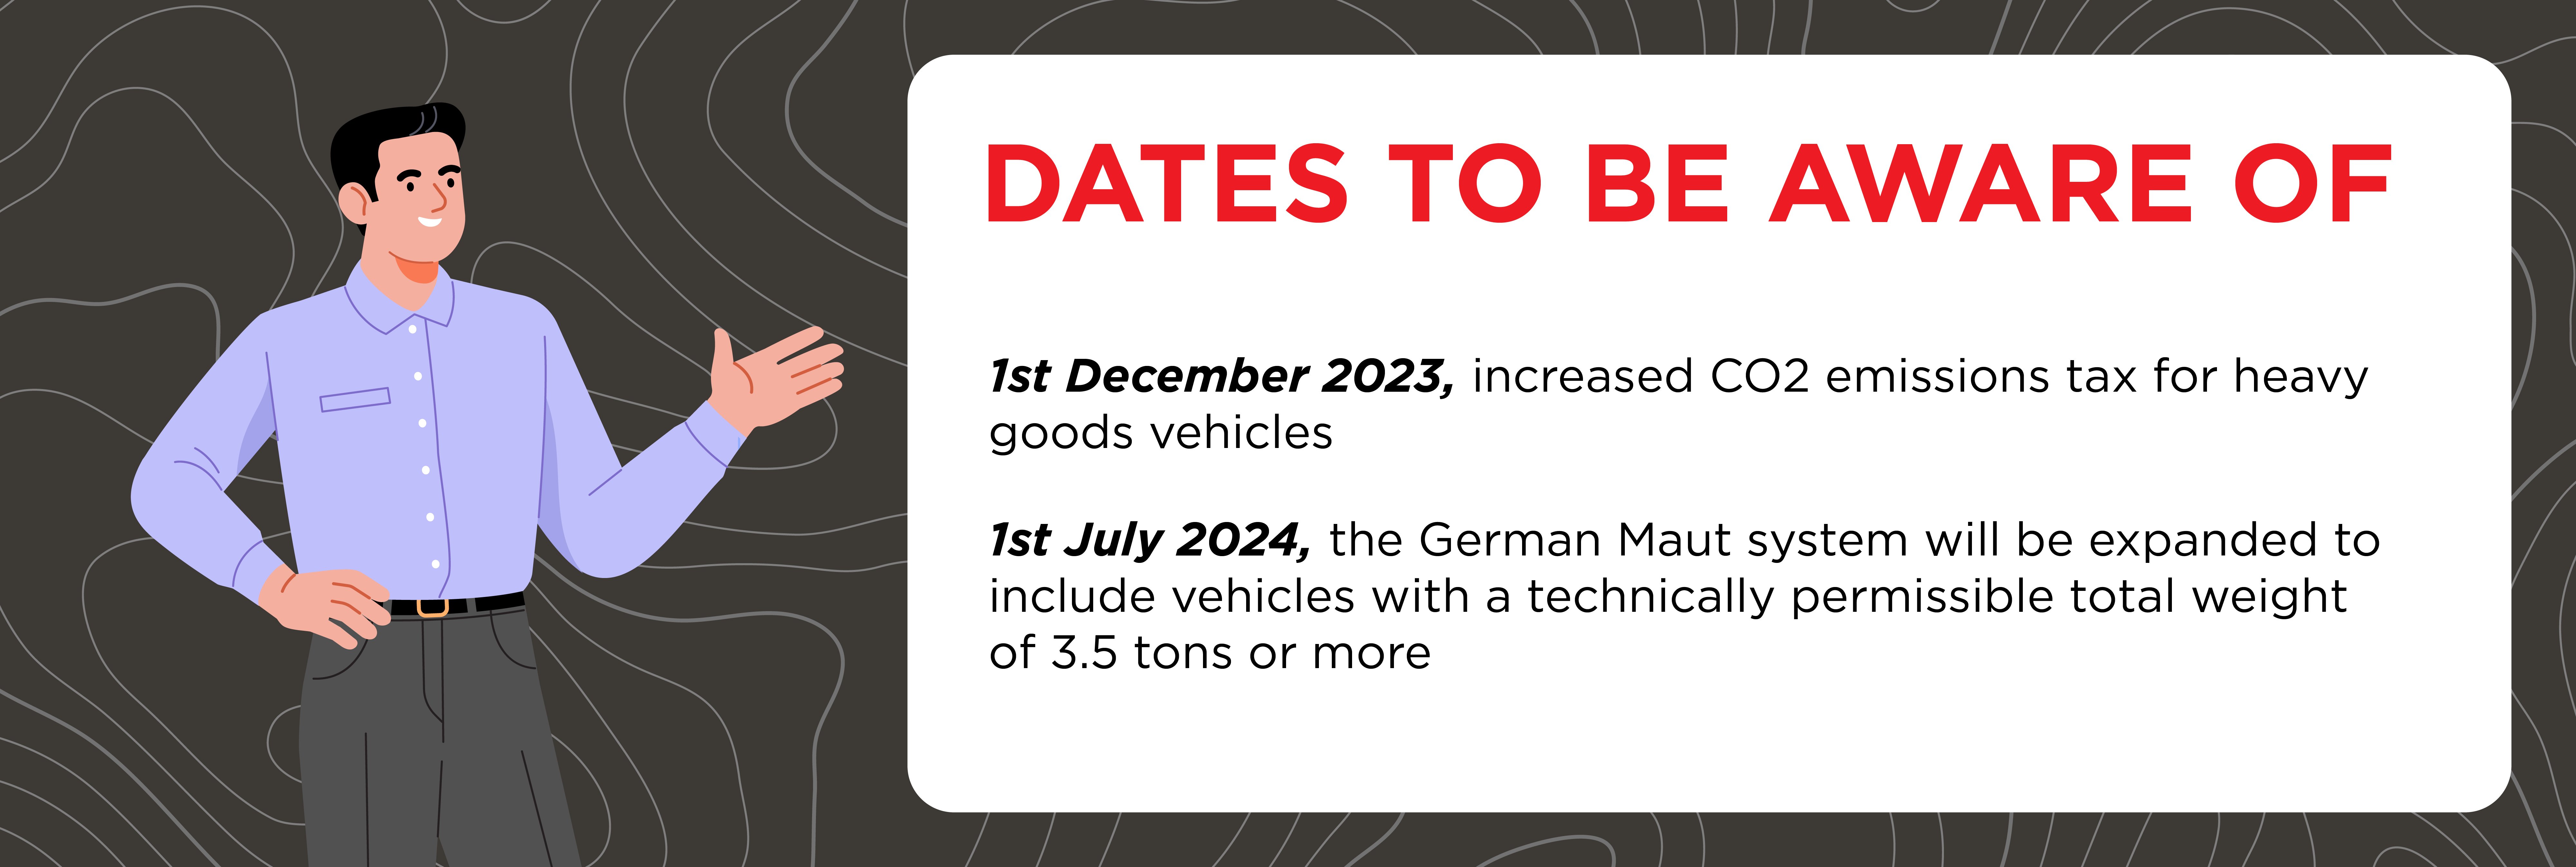 significant changes are coming to the German Maut system on December 1st, 2023, and July 1st, 2023.